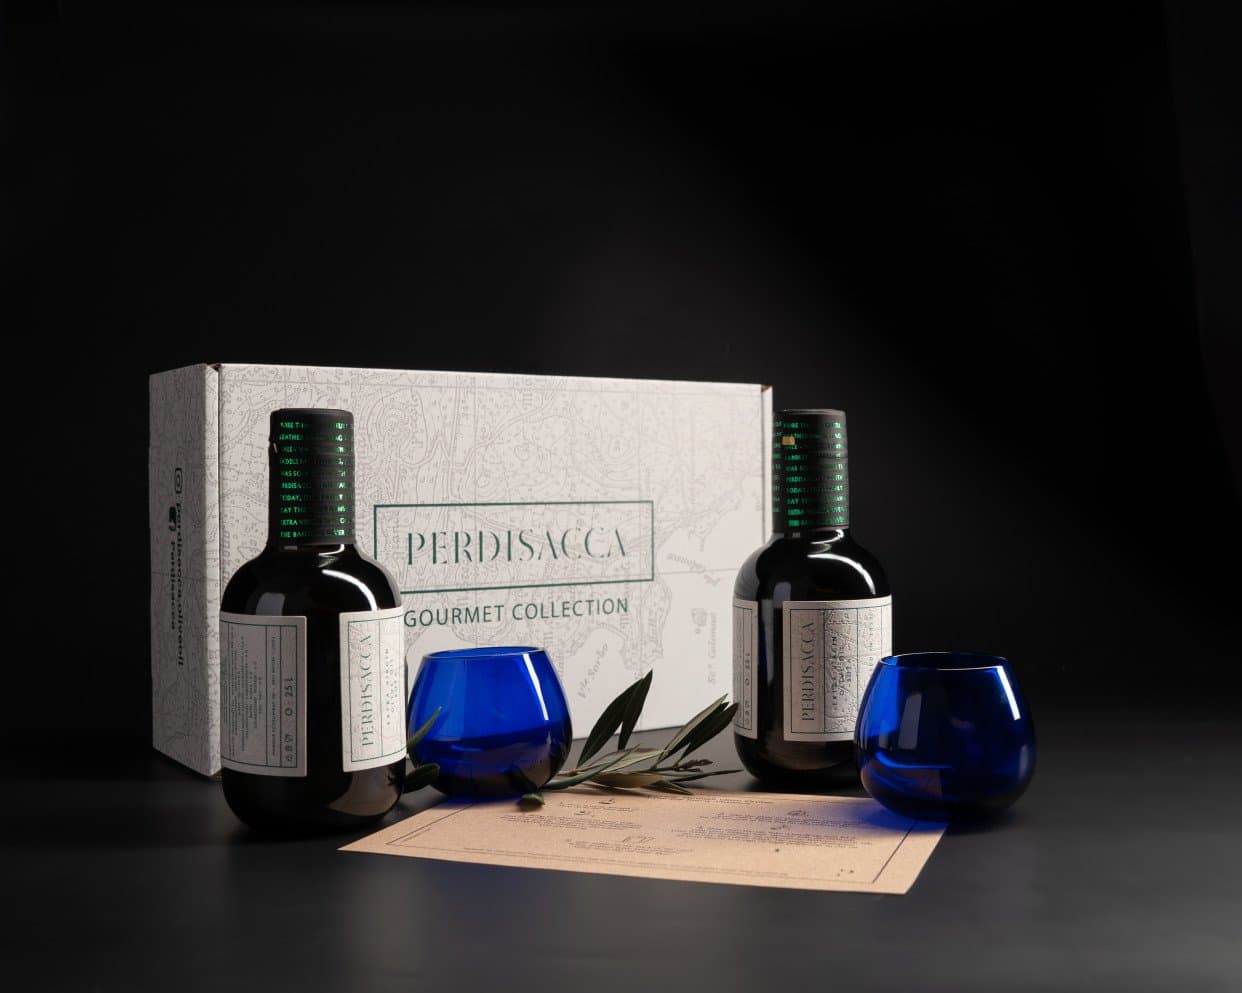 Perdisacca Gourmet Collection Gift Box